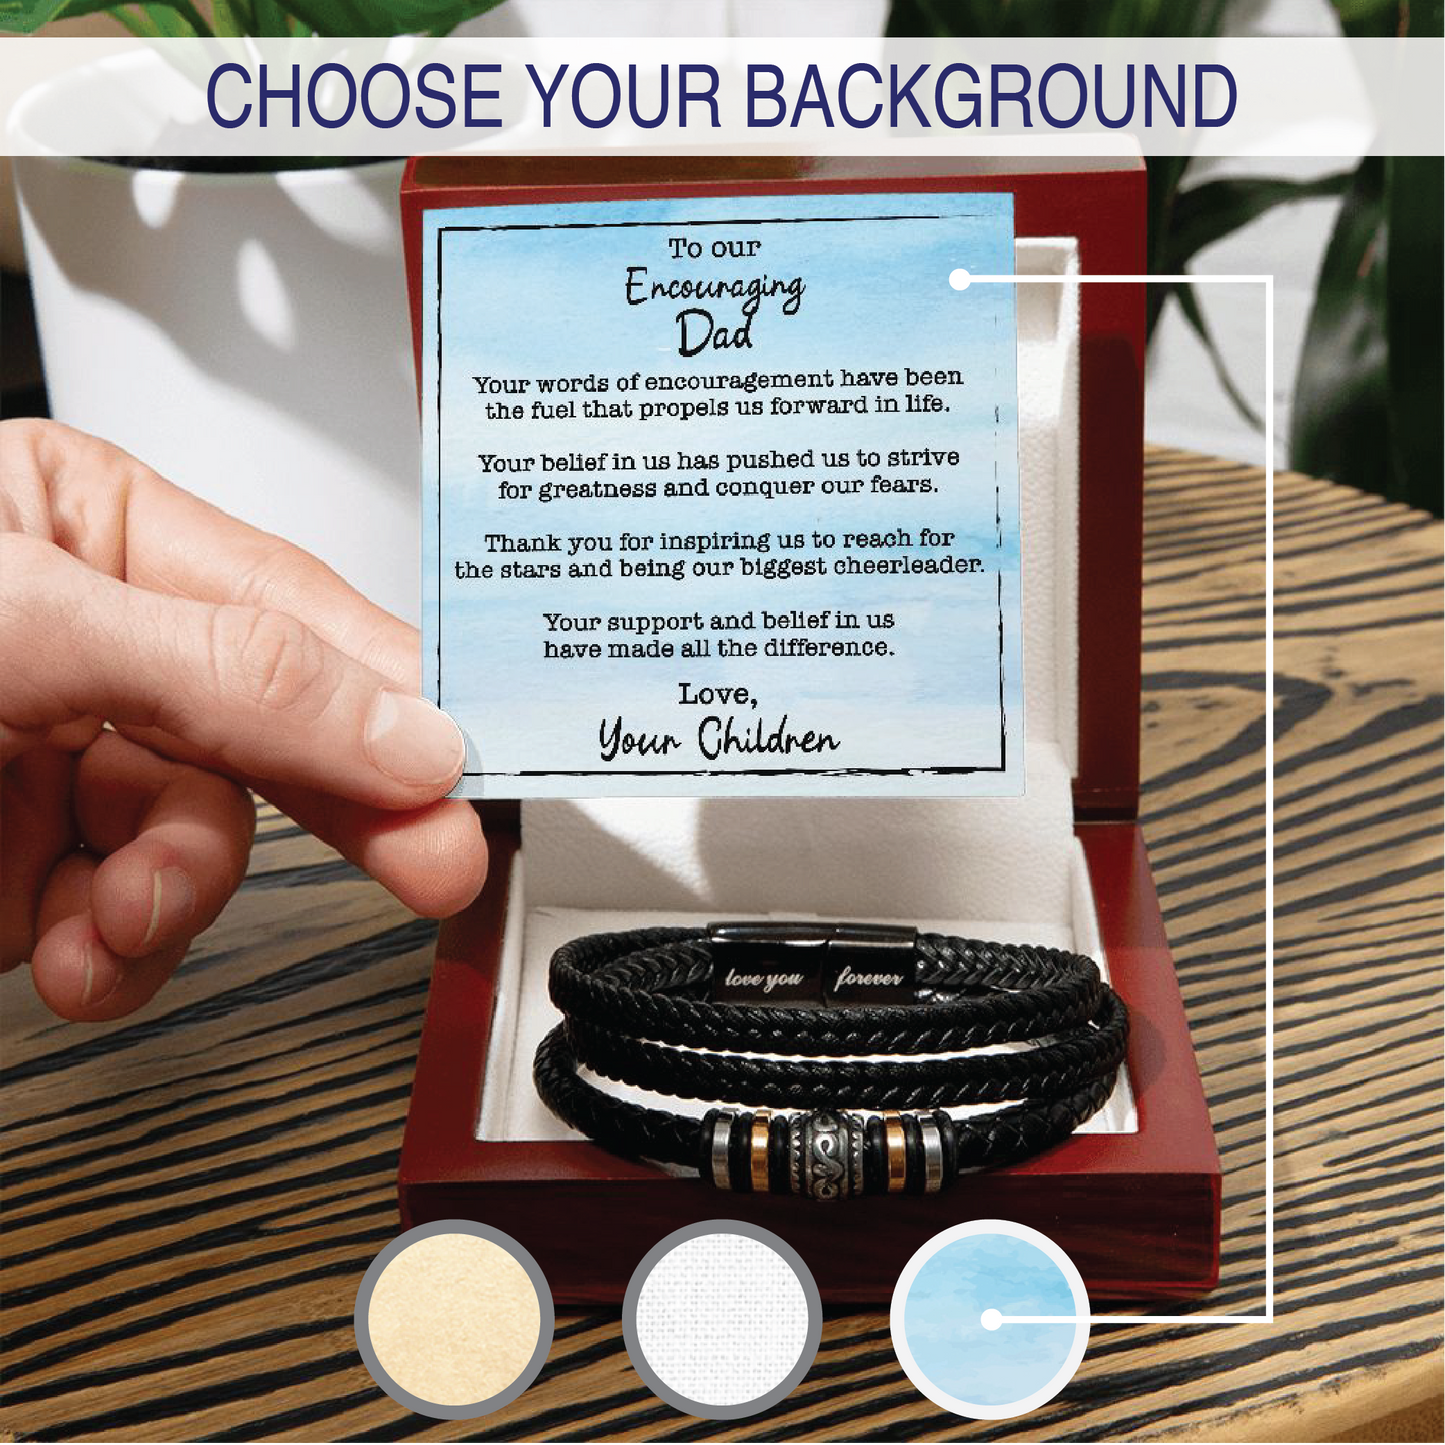 Customizable Background - Men's Love You Forever Bracelet With Wooden Box With LED And Message Card For Encouraging Dad - Elegant Endearments